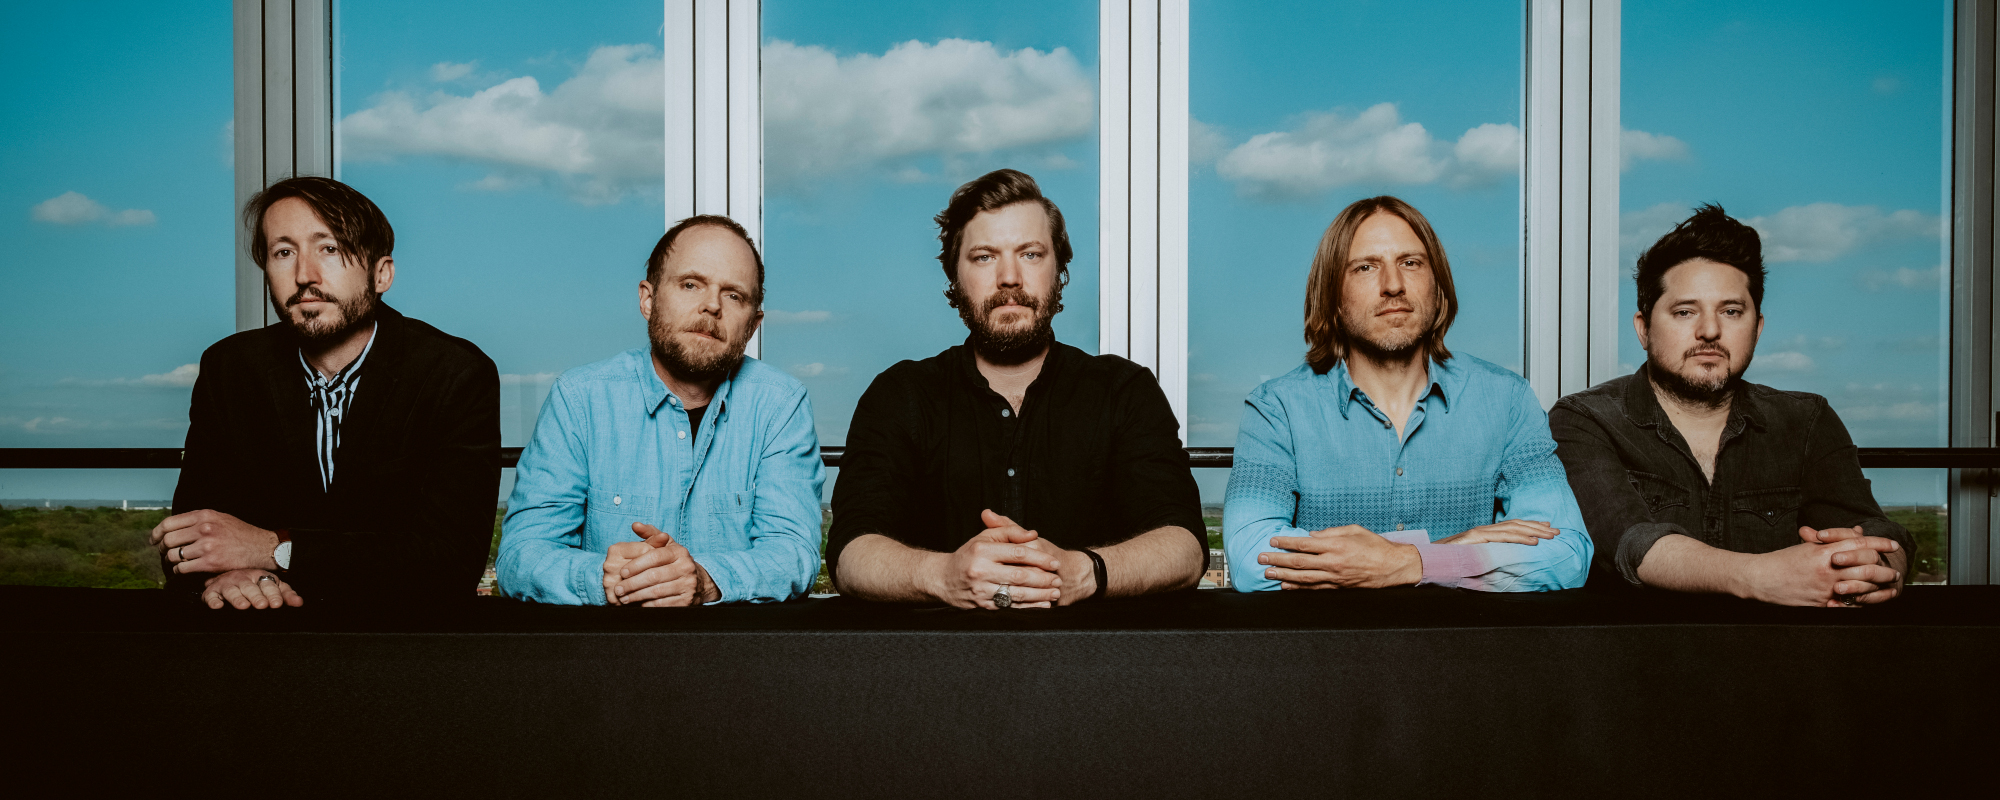 REVIEW: Midlake Creates a Sense of Camaraderie, Mystery, and Imagination on New Album